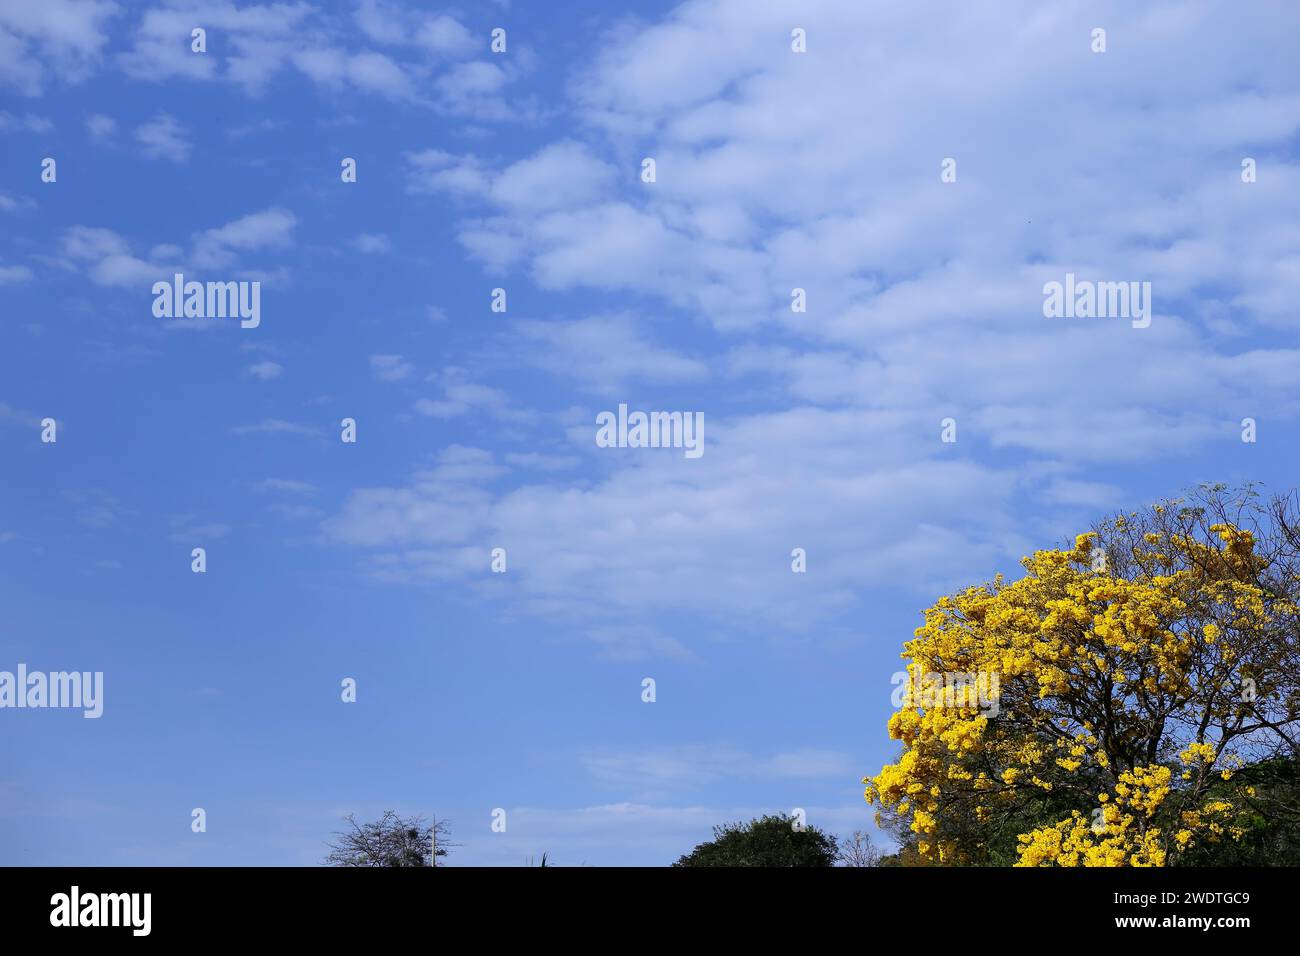 Bloom detail in yellow ipe tree with bright blue sky Stock Photo